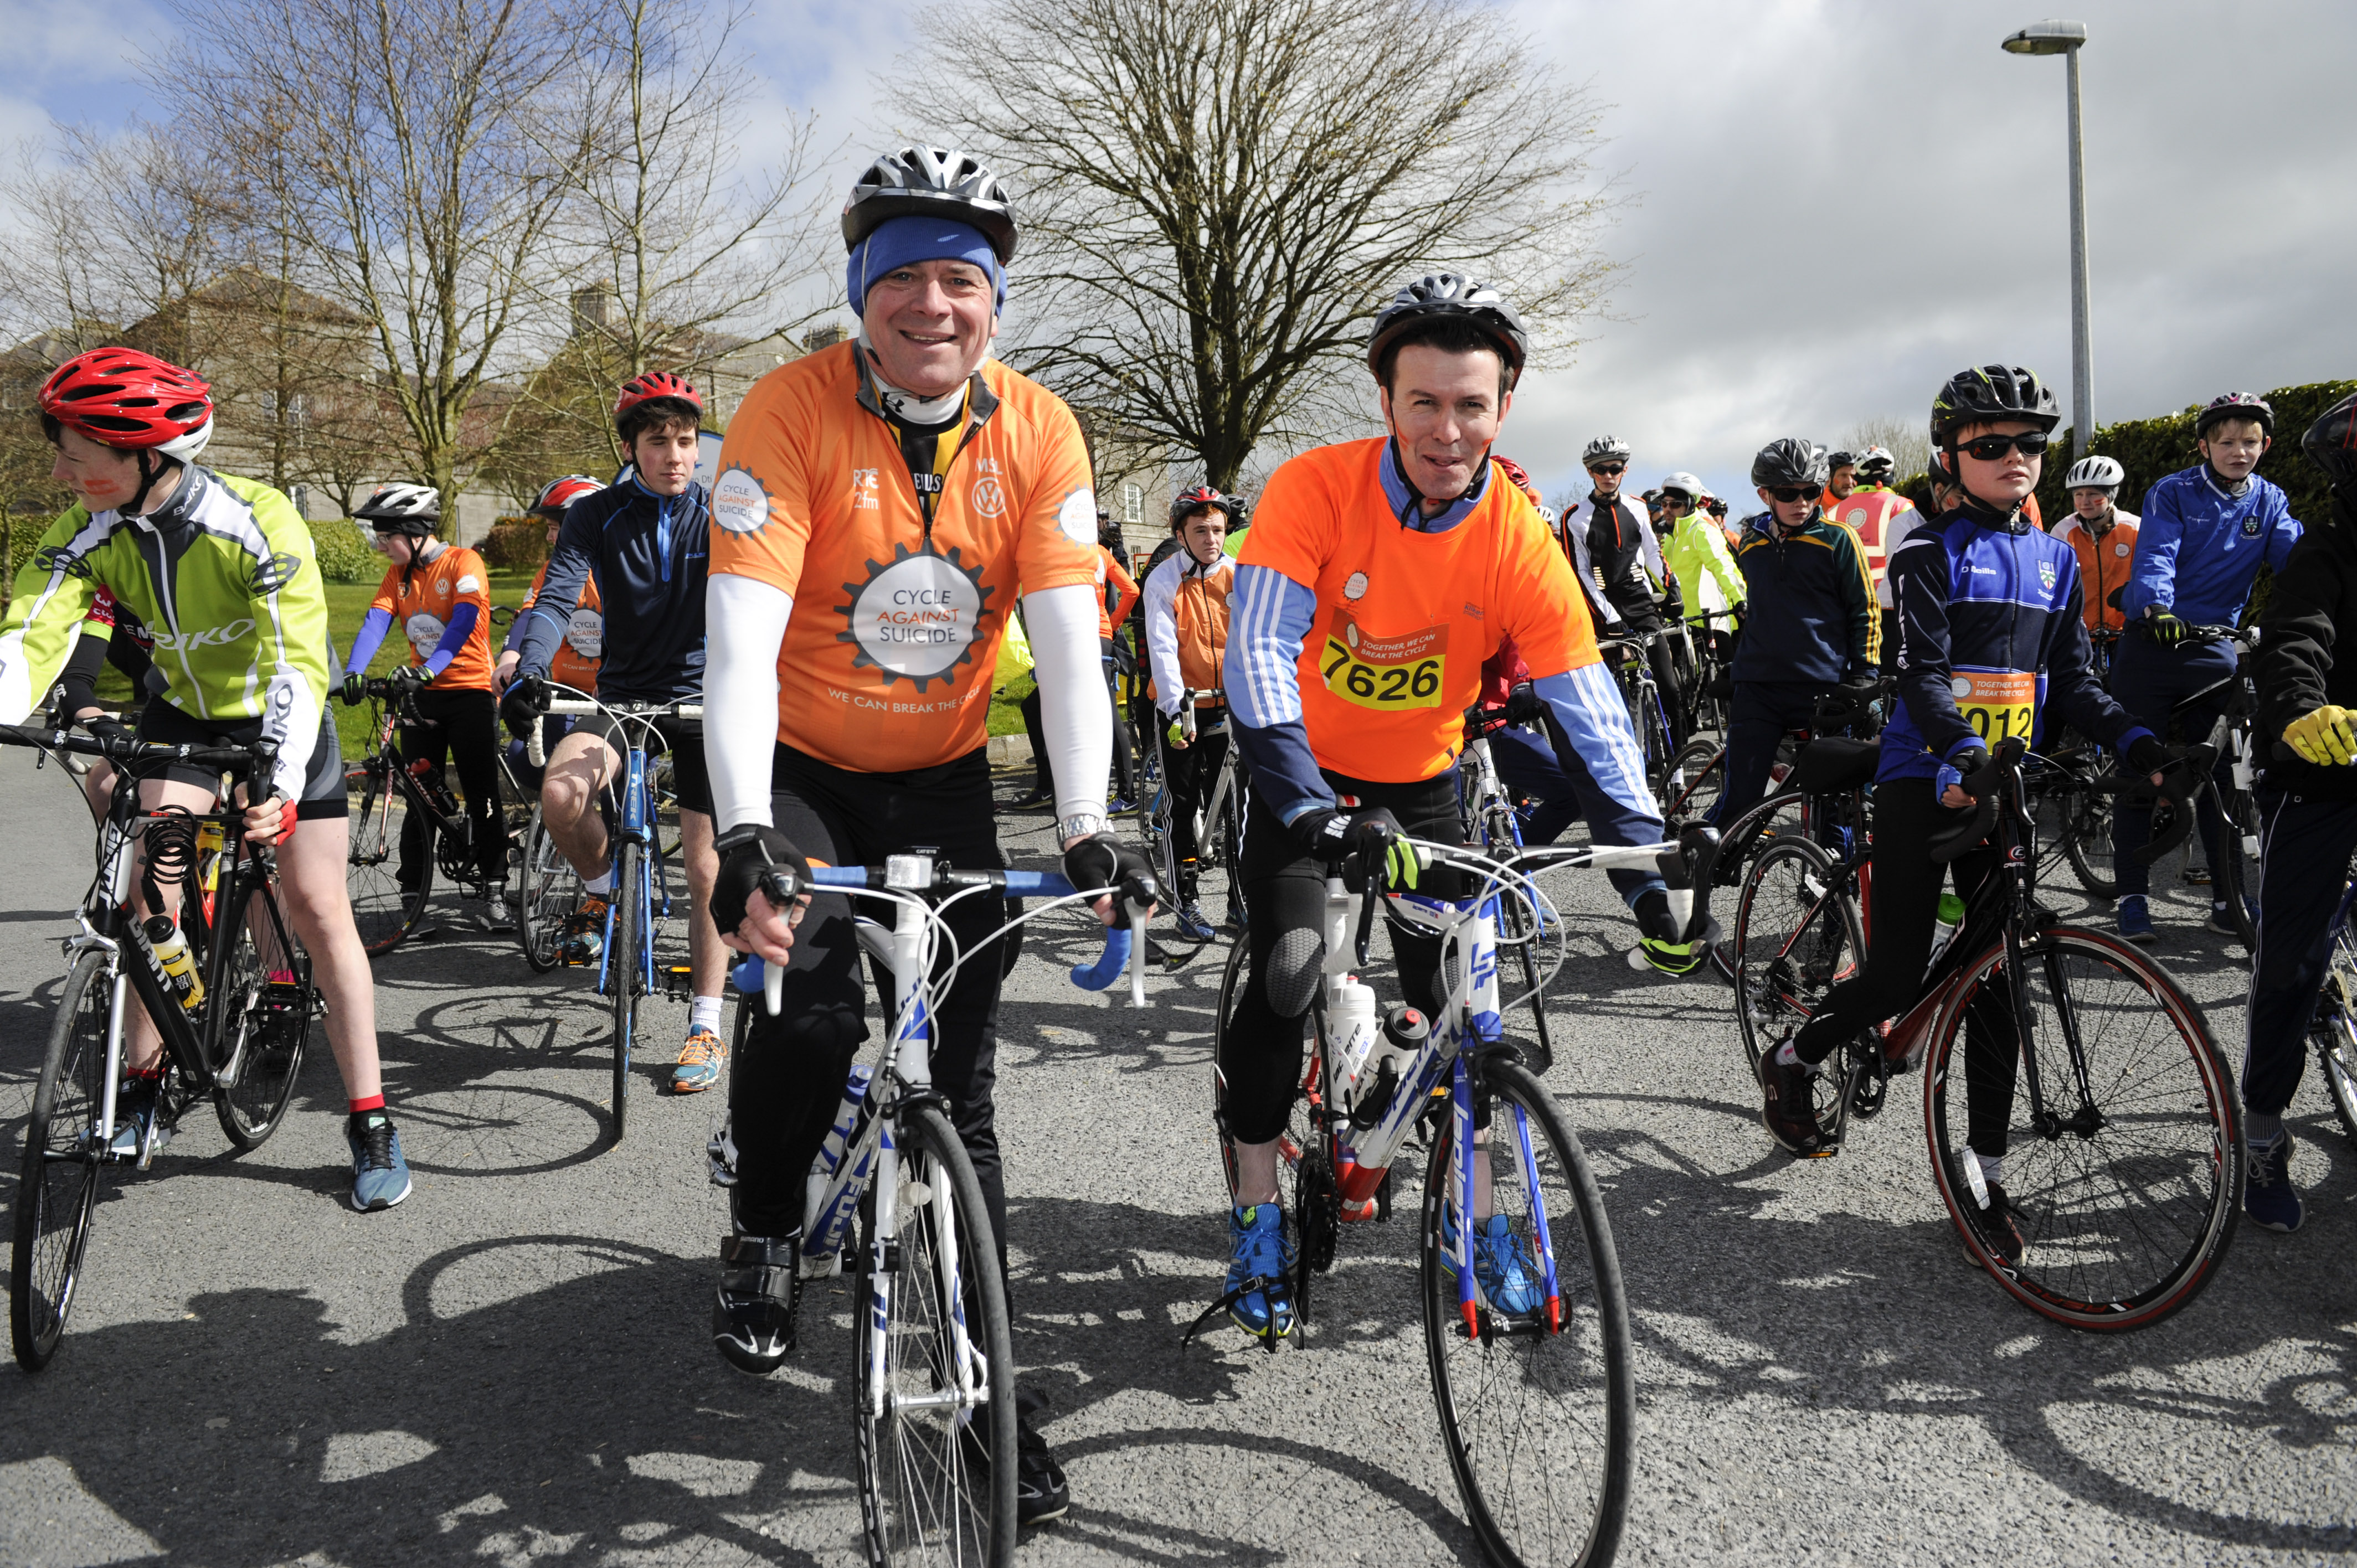 Principal of St Macartan's College, Raymond McHugh, left and Principal of Our Lady's Secondary School, Castleblayney, Eddie Kelly, who both took part in the Cycle Against Suicide on Tuesday. Â©Rory Geary/The Northern Standard